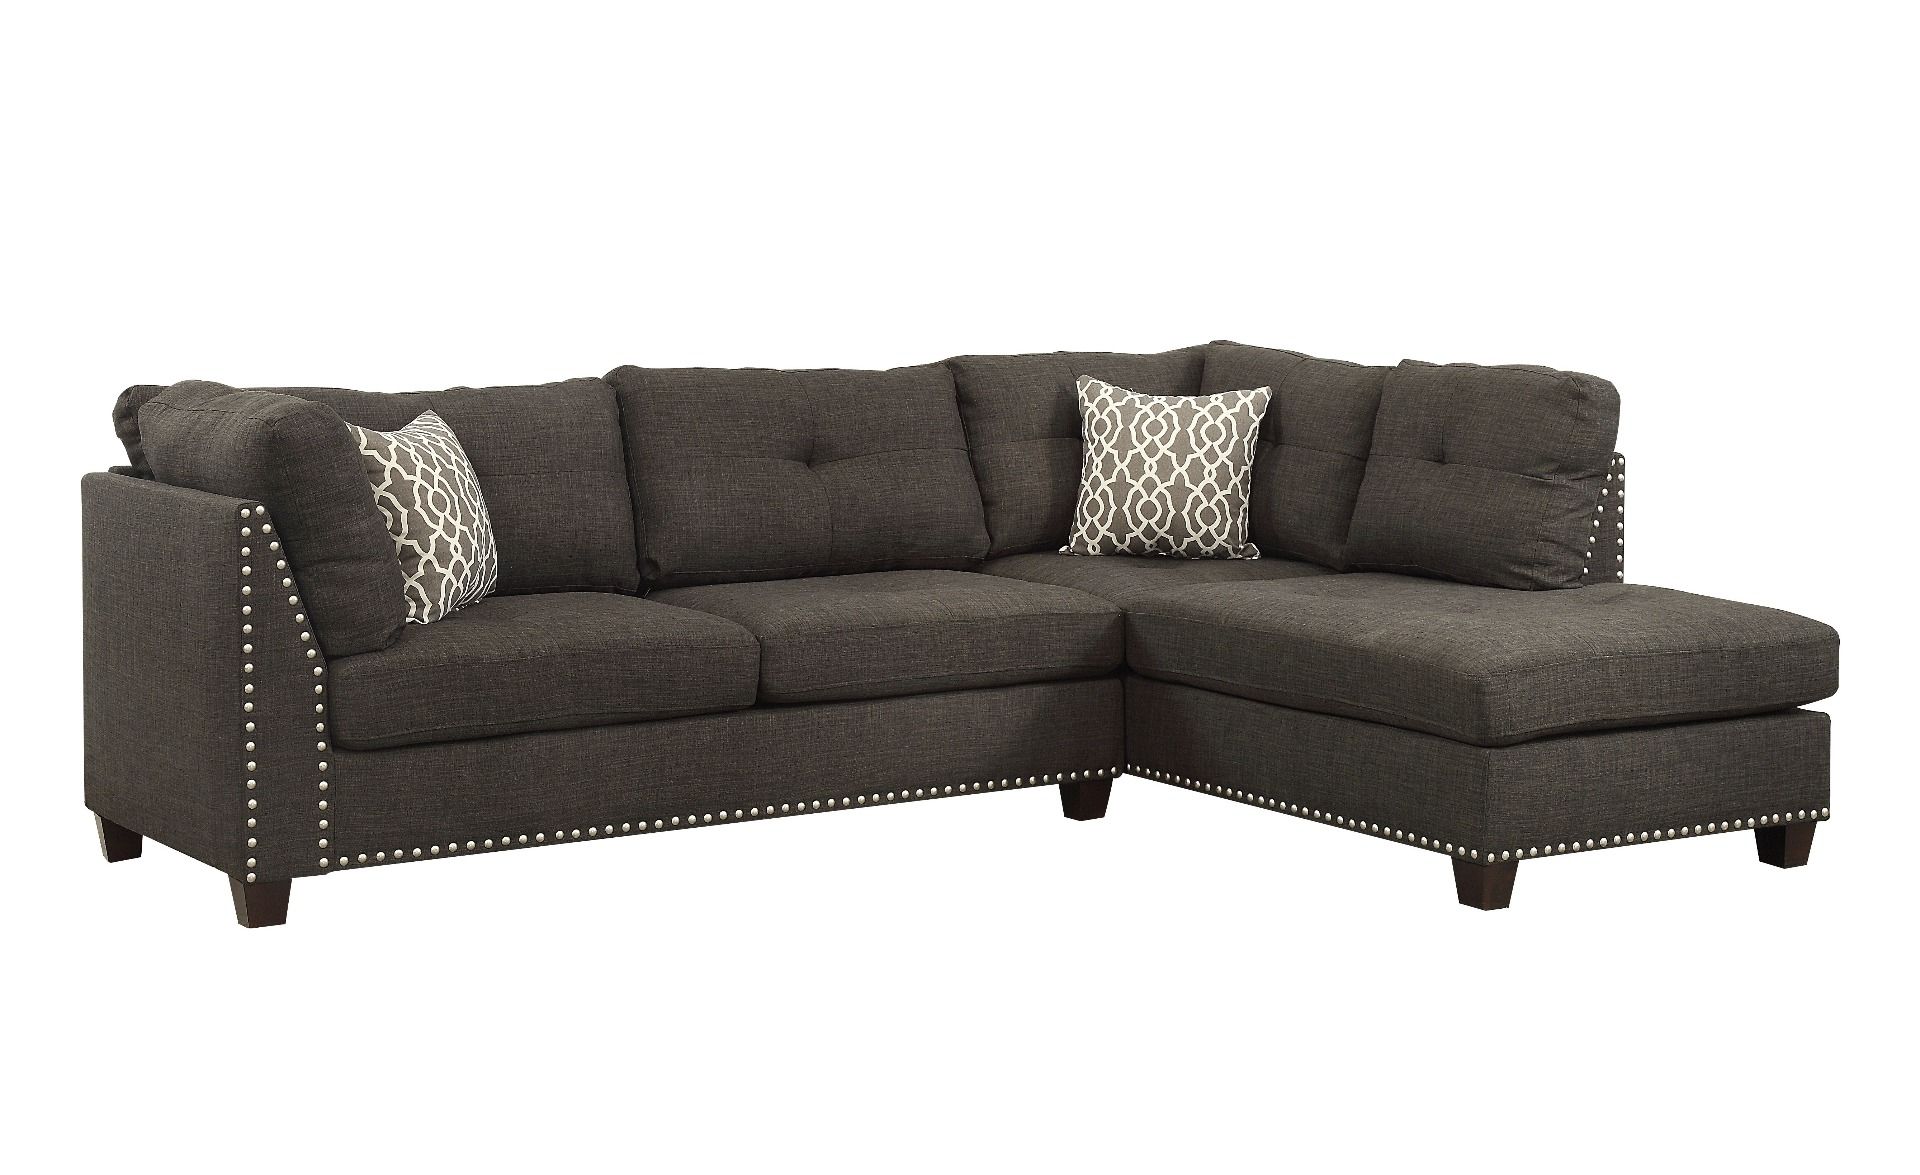 ACME Laurissa Sectional Sofa Ottoman (2 Pillows) in Charcoal Linen